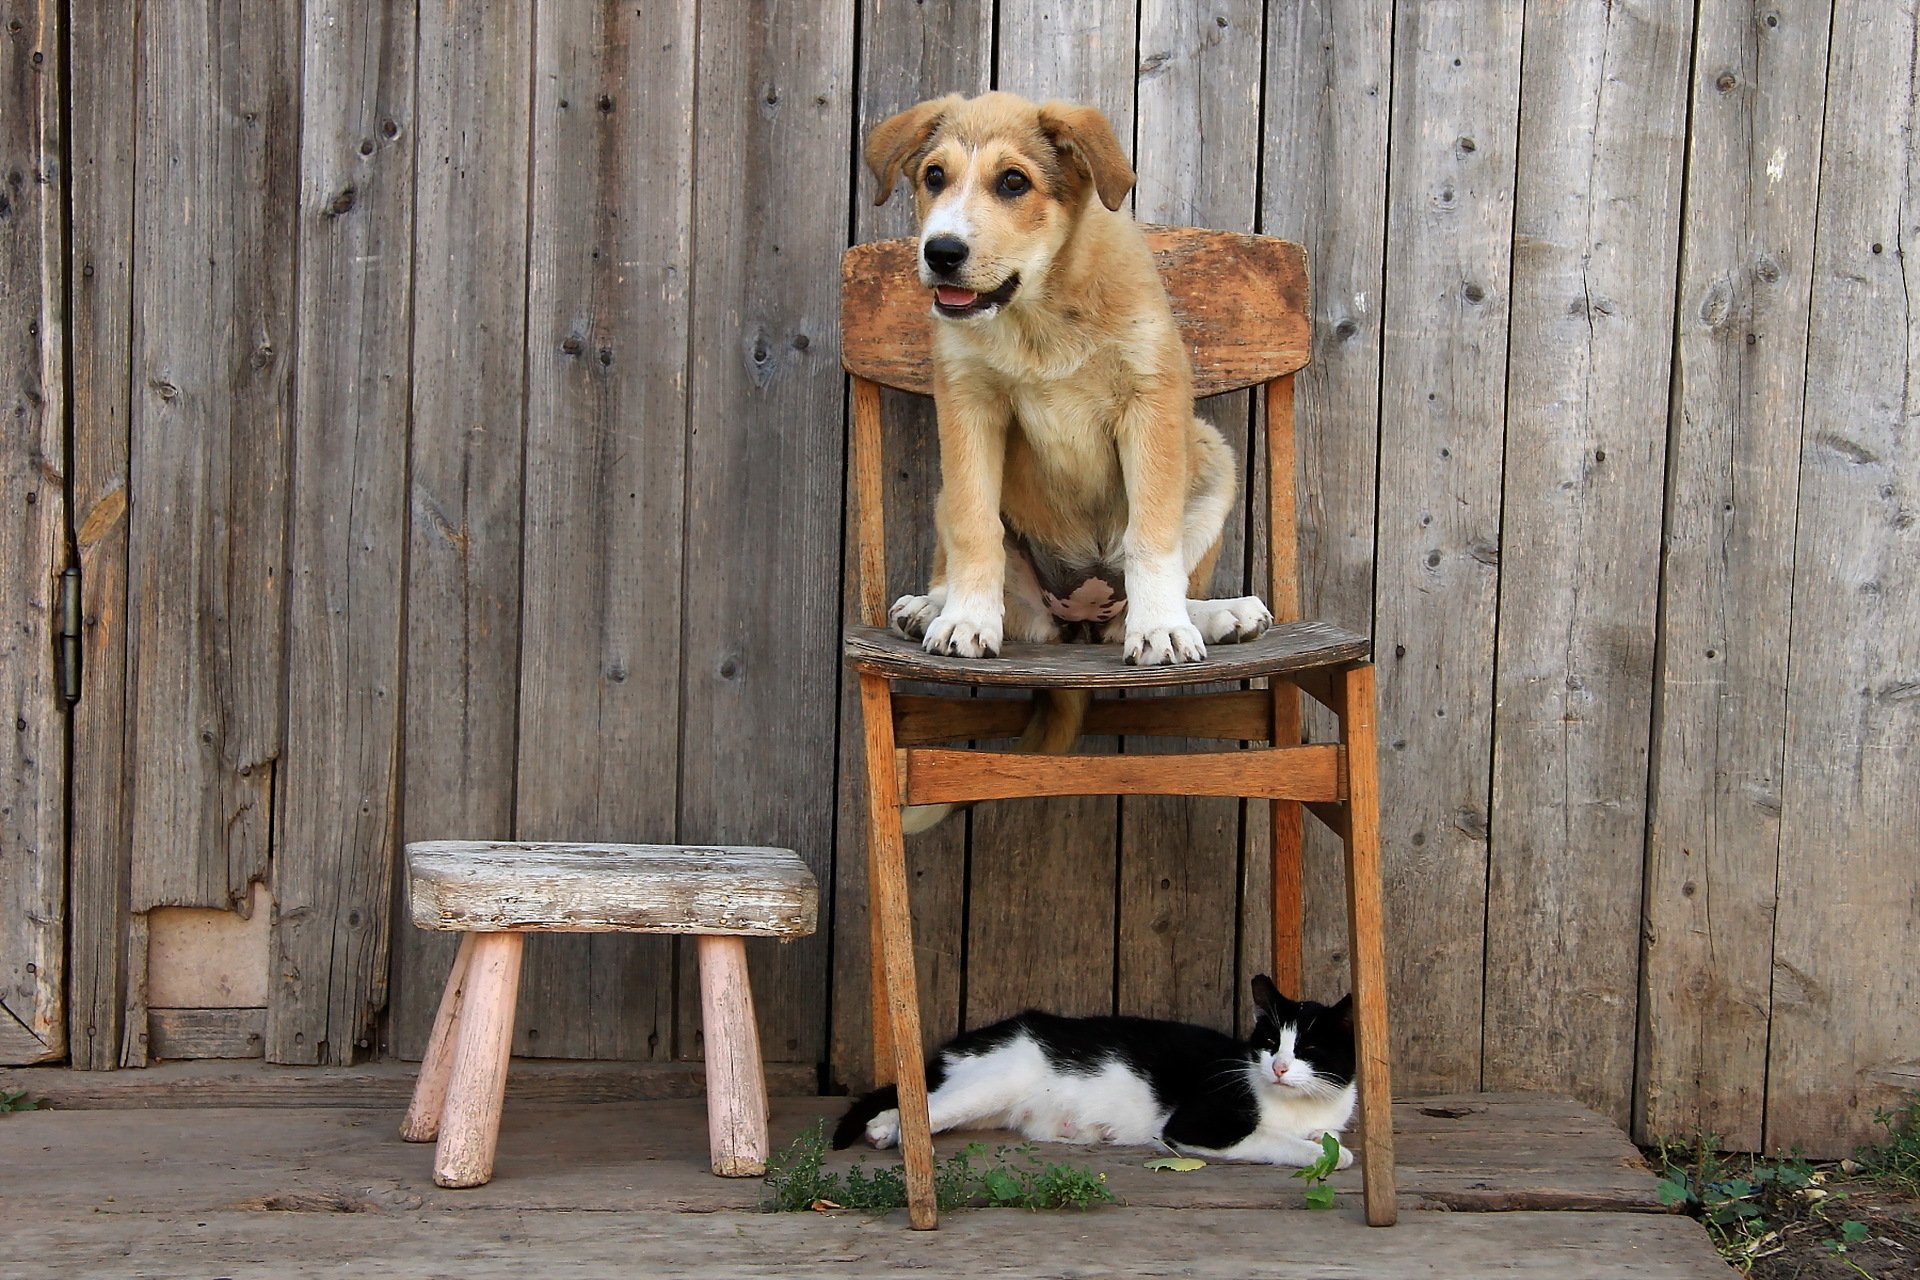 dogs, Puppy, Chairs, Animals, Baby, Cats, Cat Wallpaper